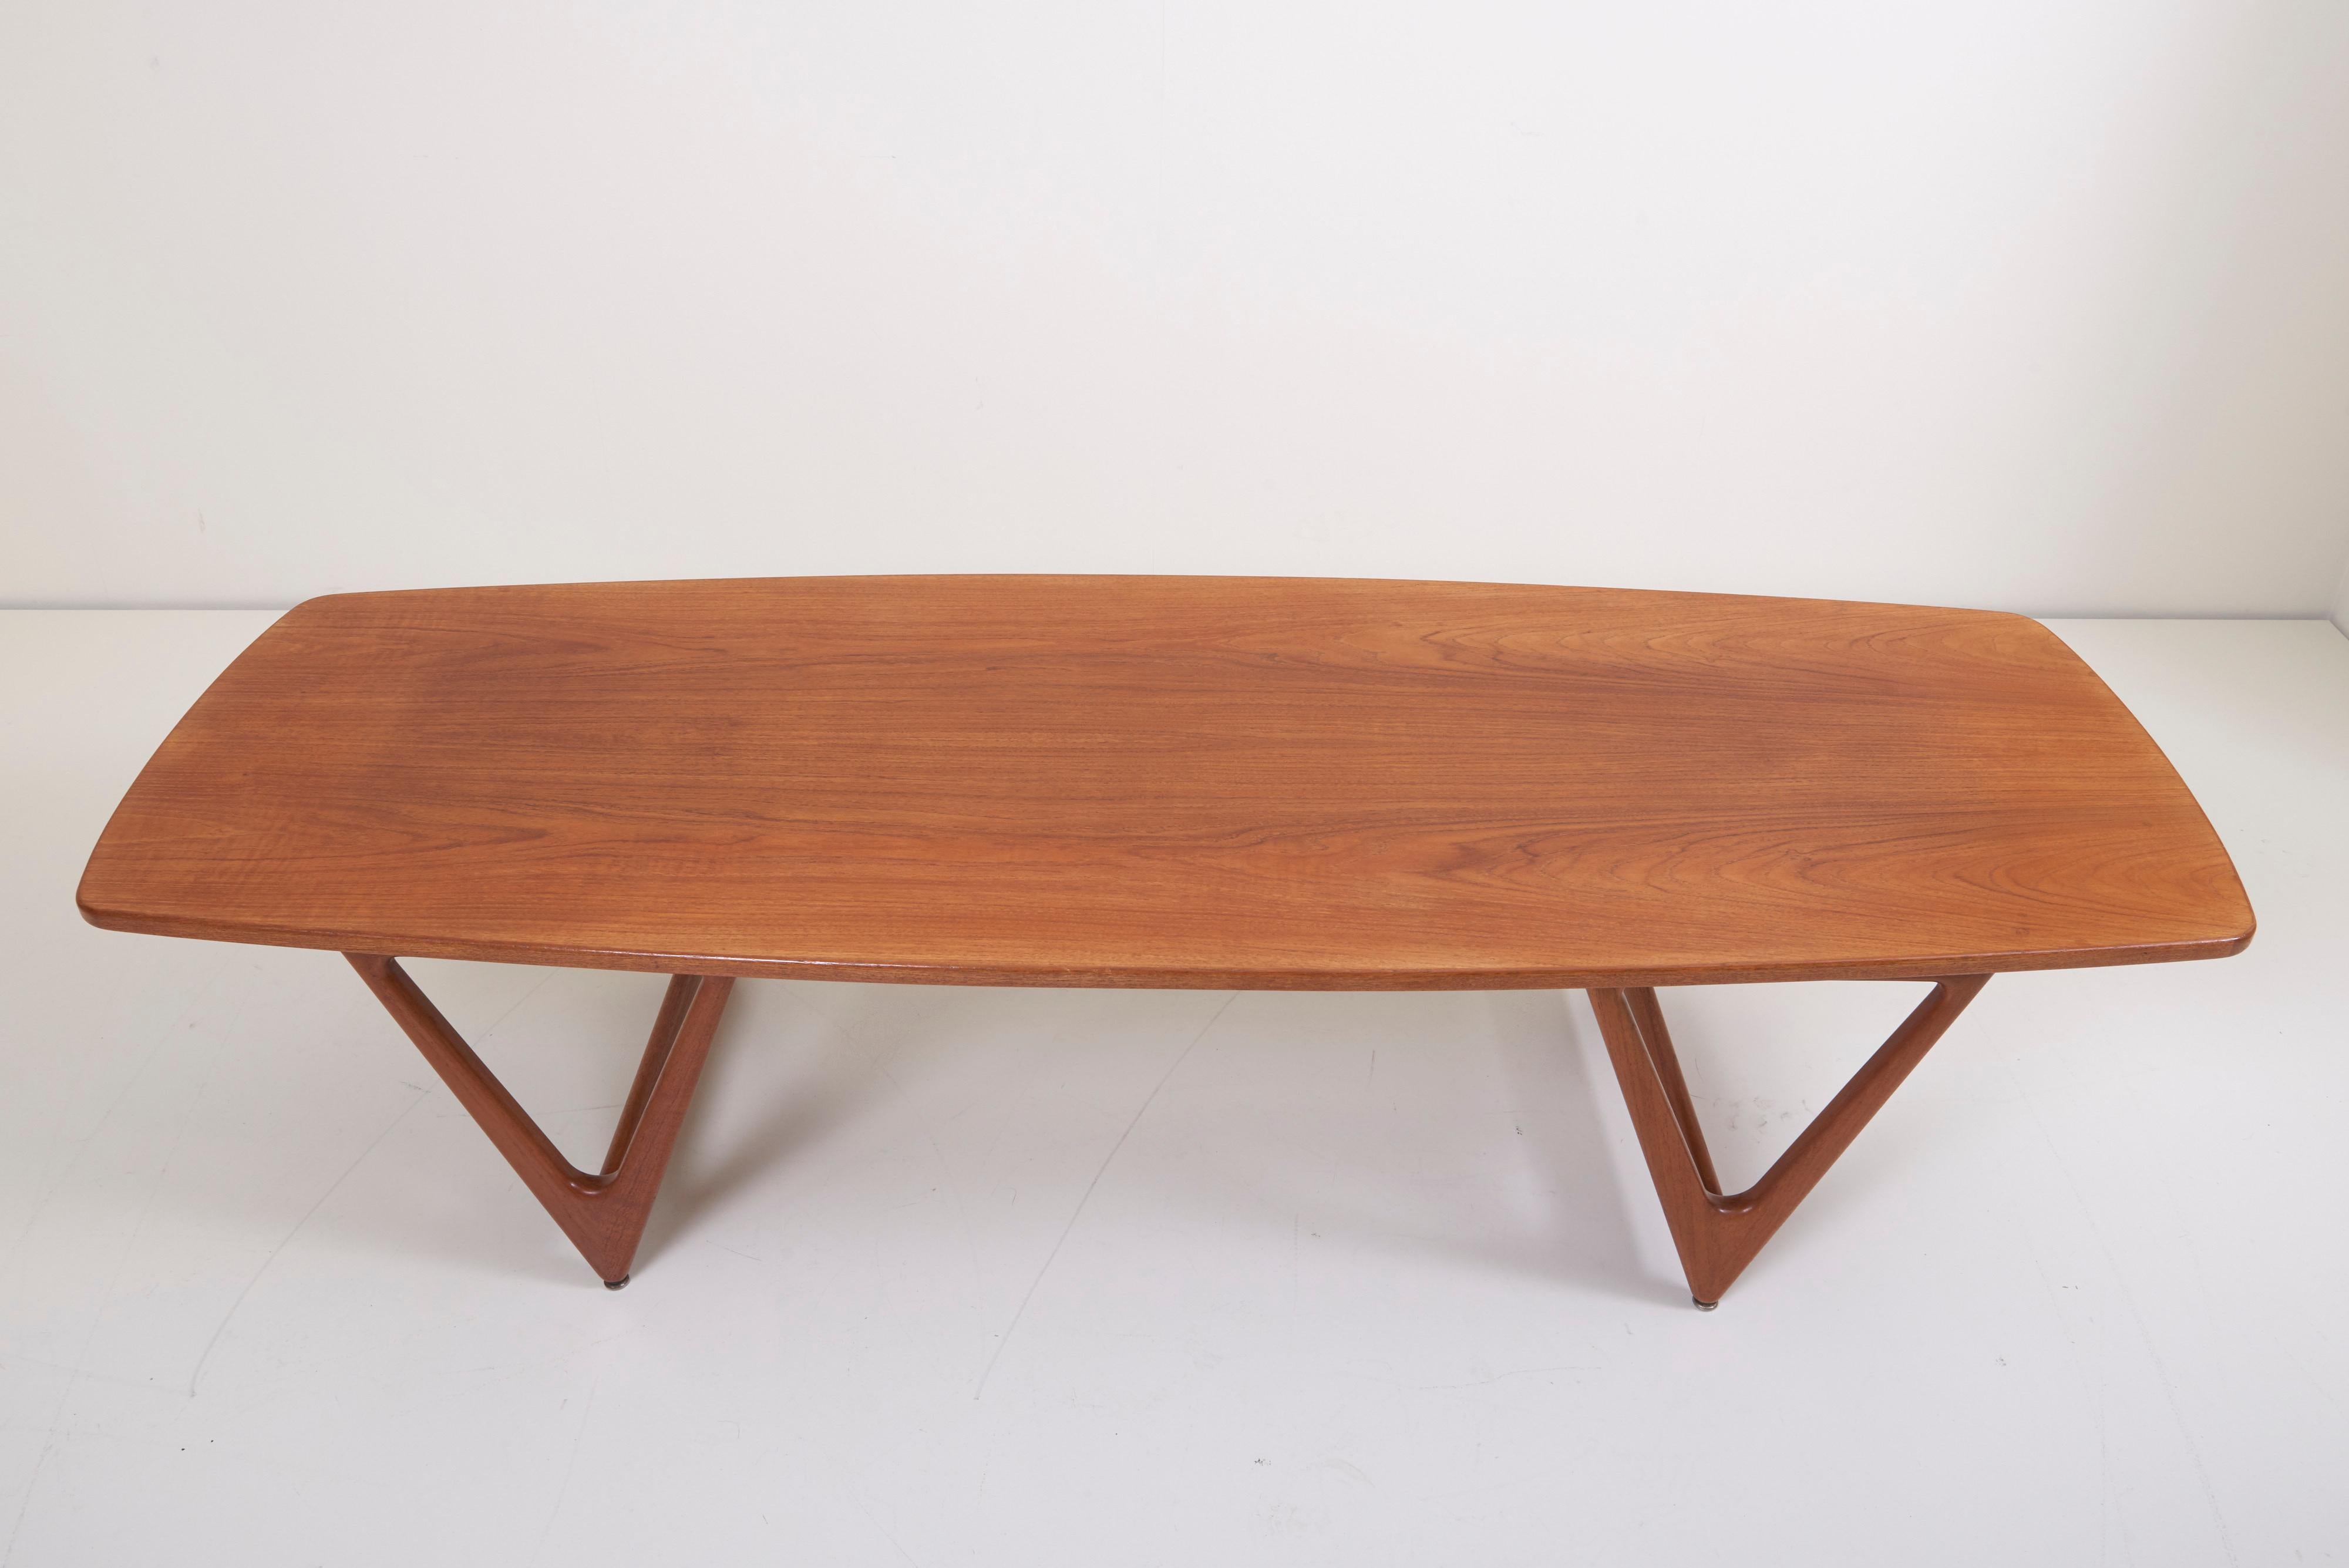 Amazing “Surfboard” coffee table by Kurt Østervig, with a long tabletop with sweeping teak veneer and cool, beautifully sculpted V-shaped legs. A real conversations piece.